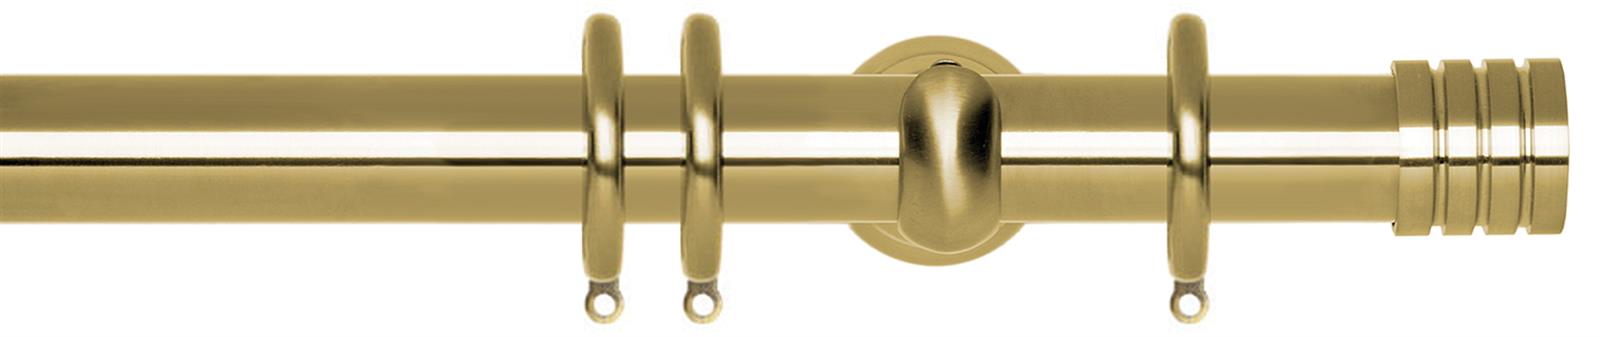 Rolls Neo 28mm by Hallis Hudson Metal Curtain Pole in a Spun Brass effect finish with an adjustable cup bracket and a Stud finial